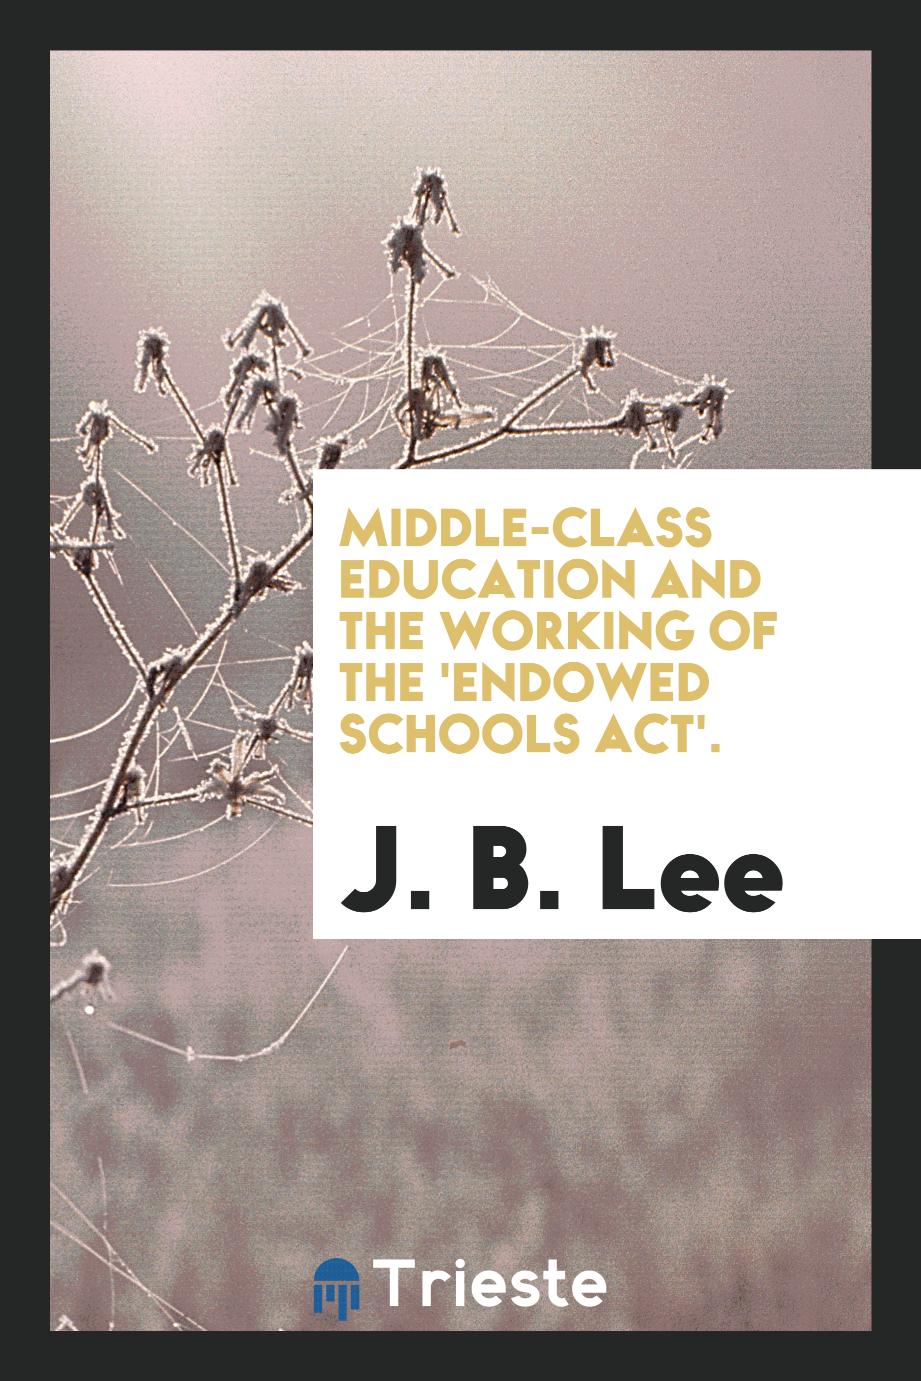 Middle-class education and the working of the 'Endowed schools act'.